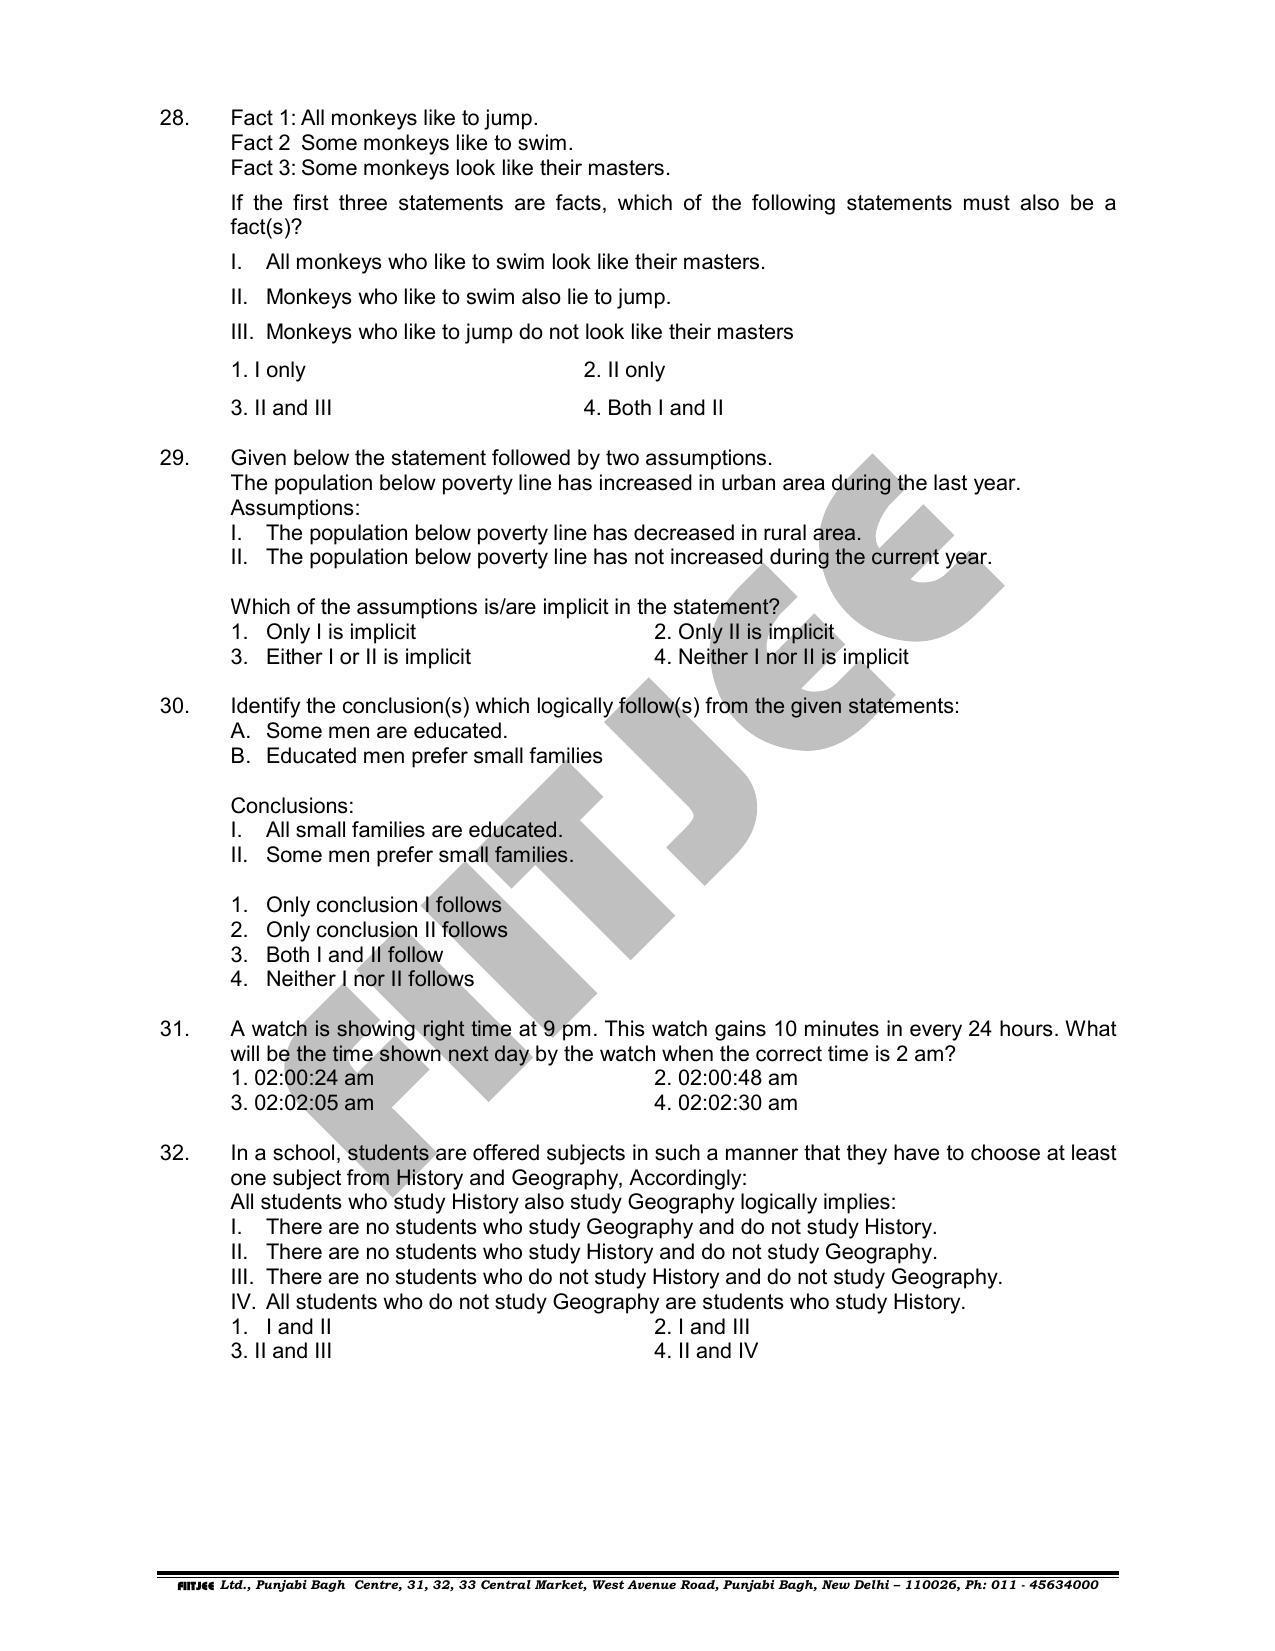 NTSE 2018 (Stage II) MAT Question Paper (May 13, 2018 ) - Page 9